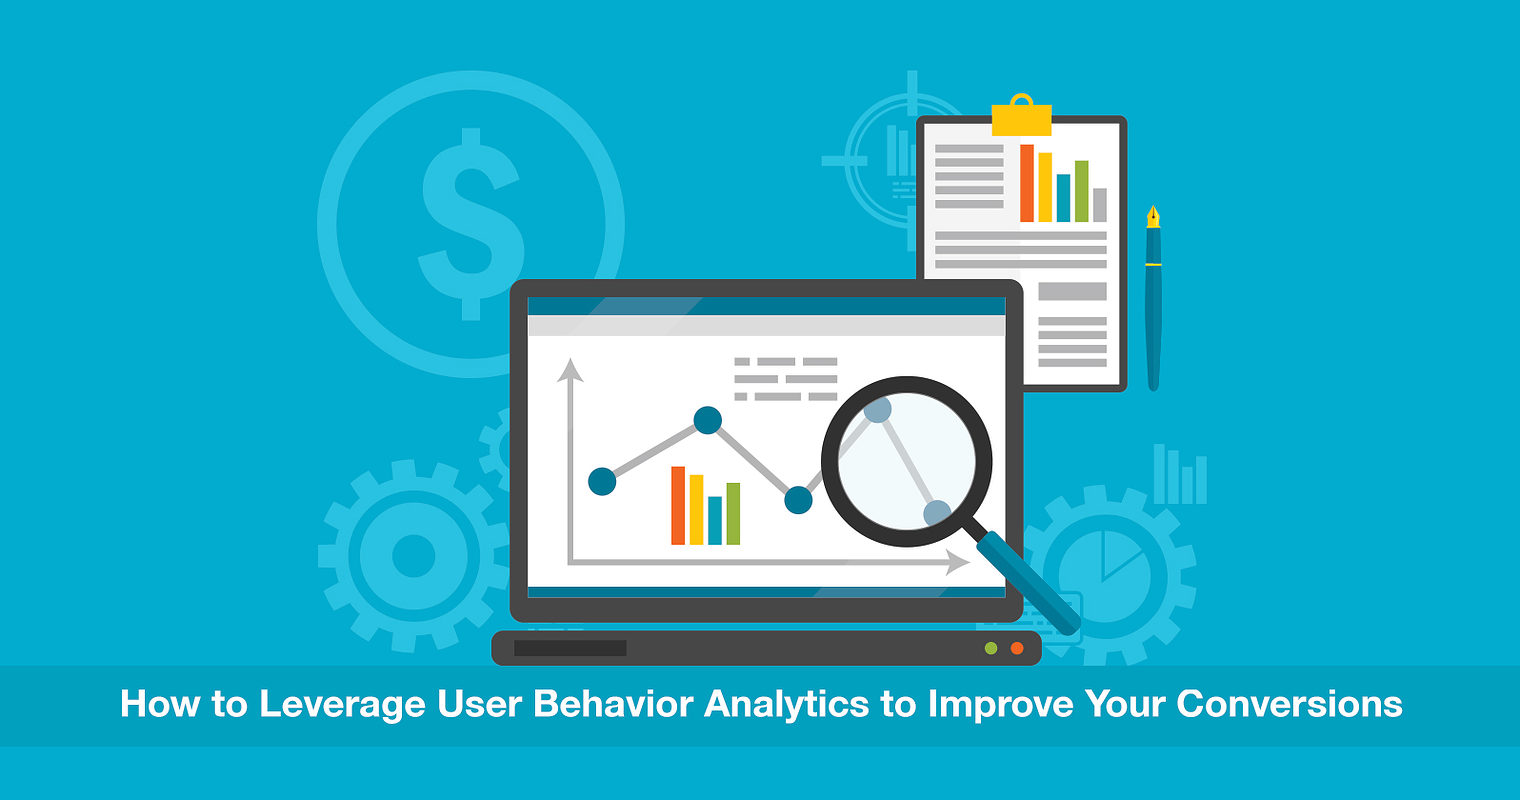 How to Use User Behavior Analytics to Increase Your Conversions: 5 Tips